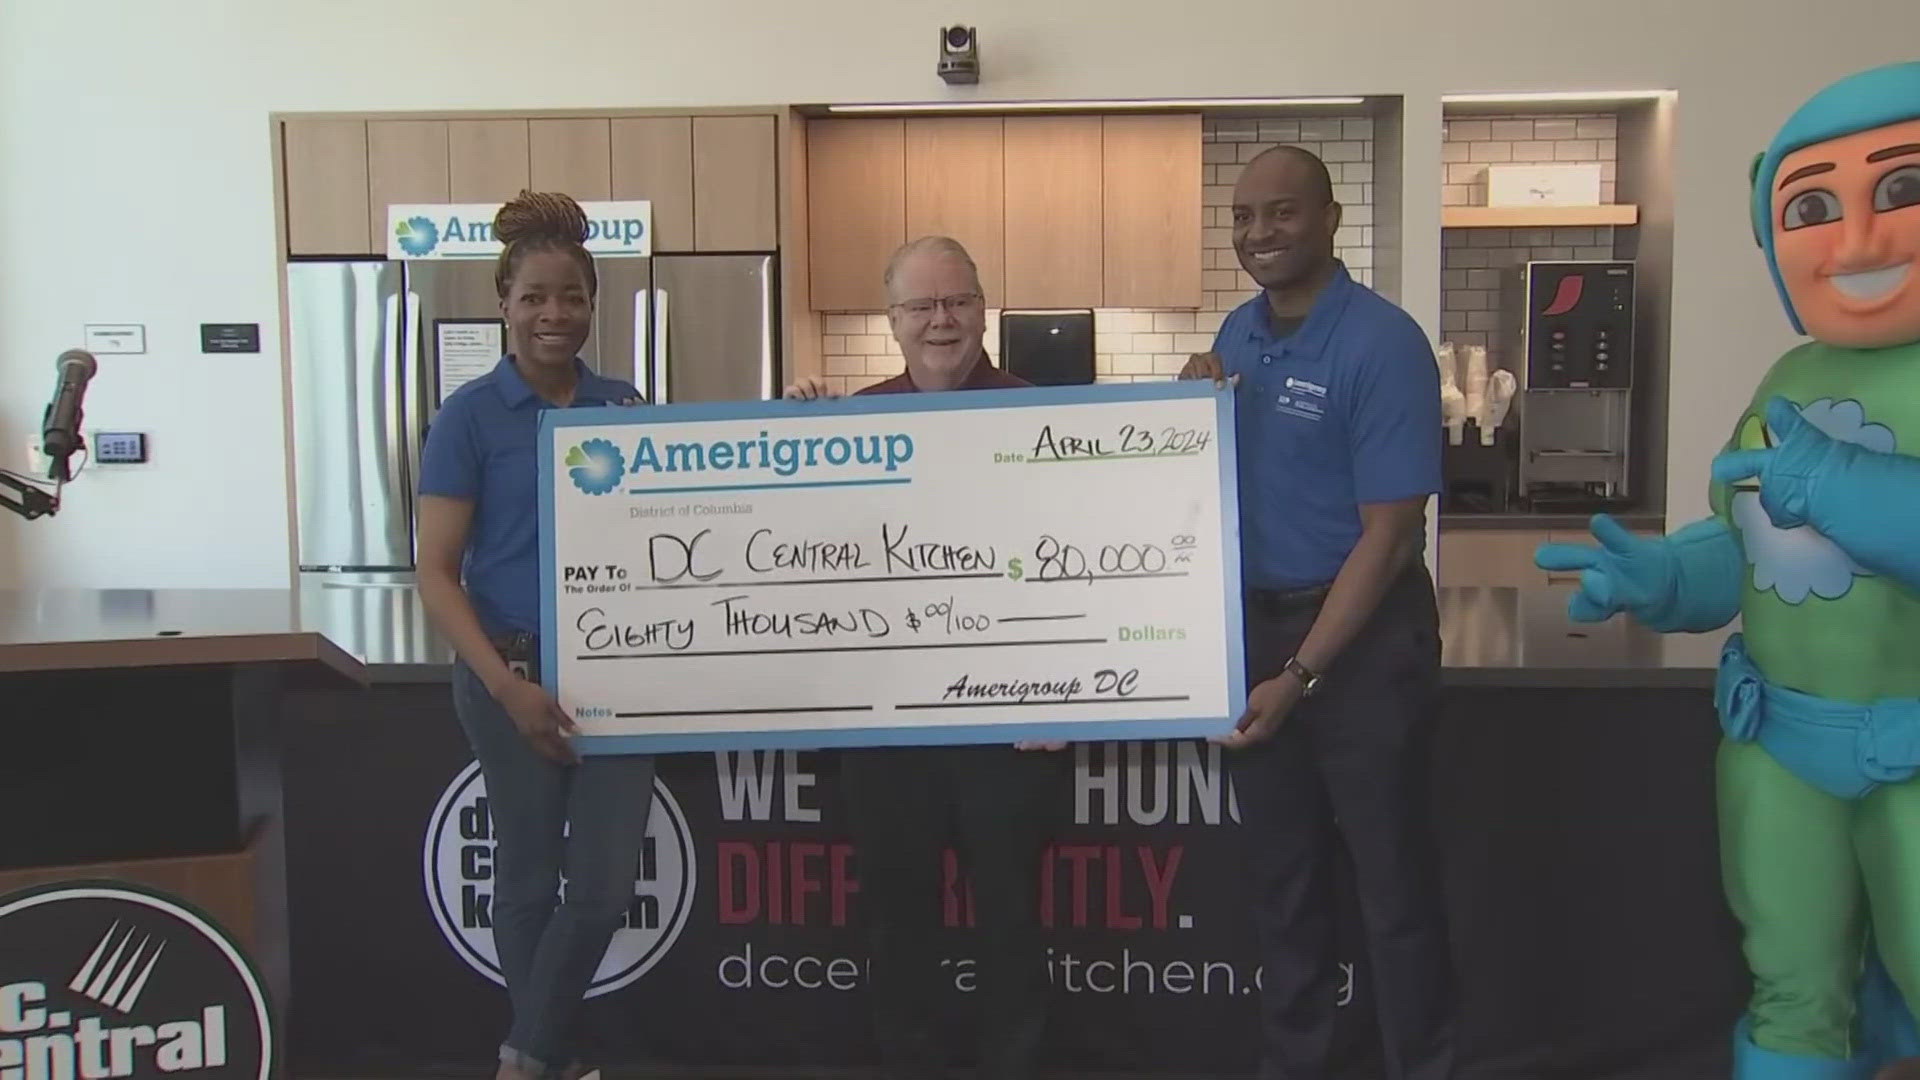 Amerigroup DC presented DC Central Kitchen with a check for $80,000.
The money will support the nonprofit's culinary job training program.